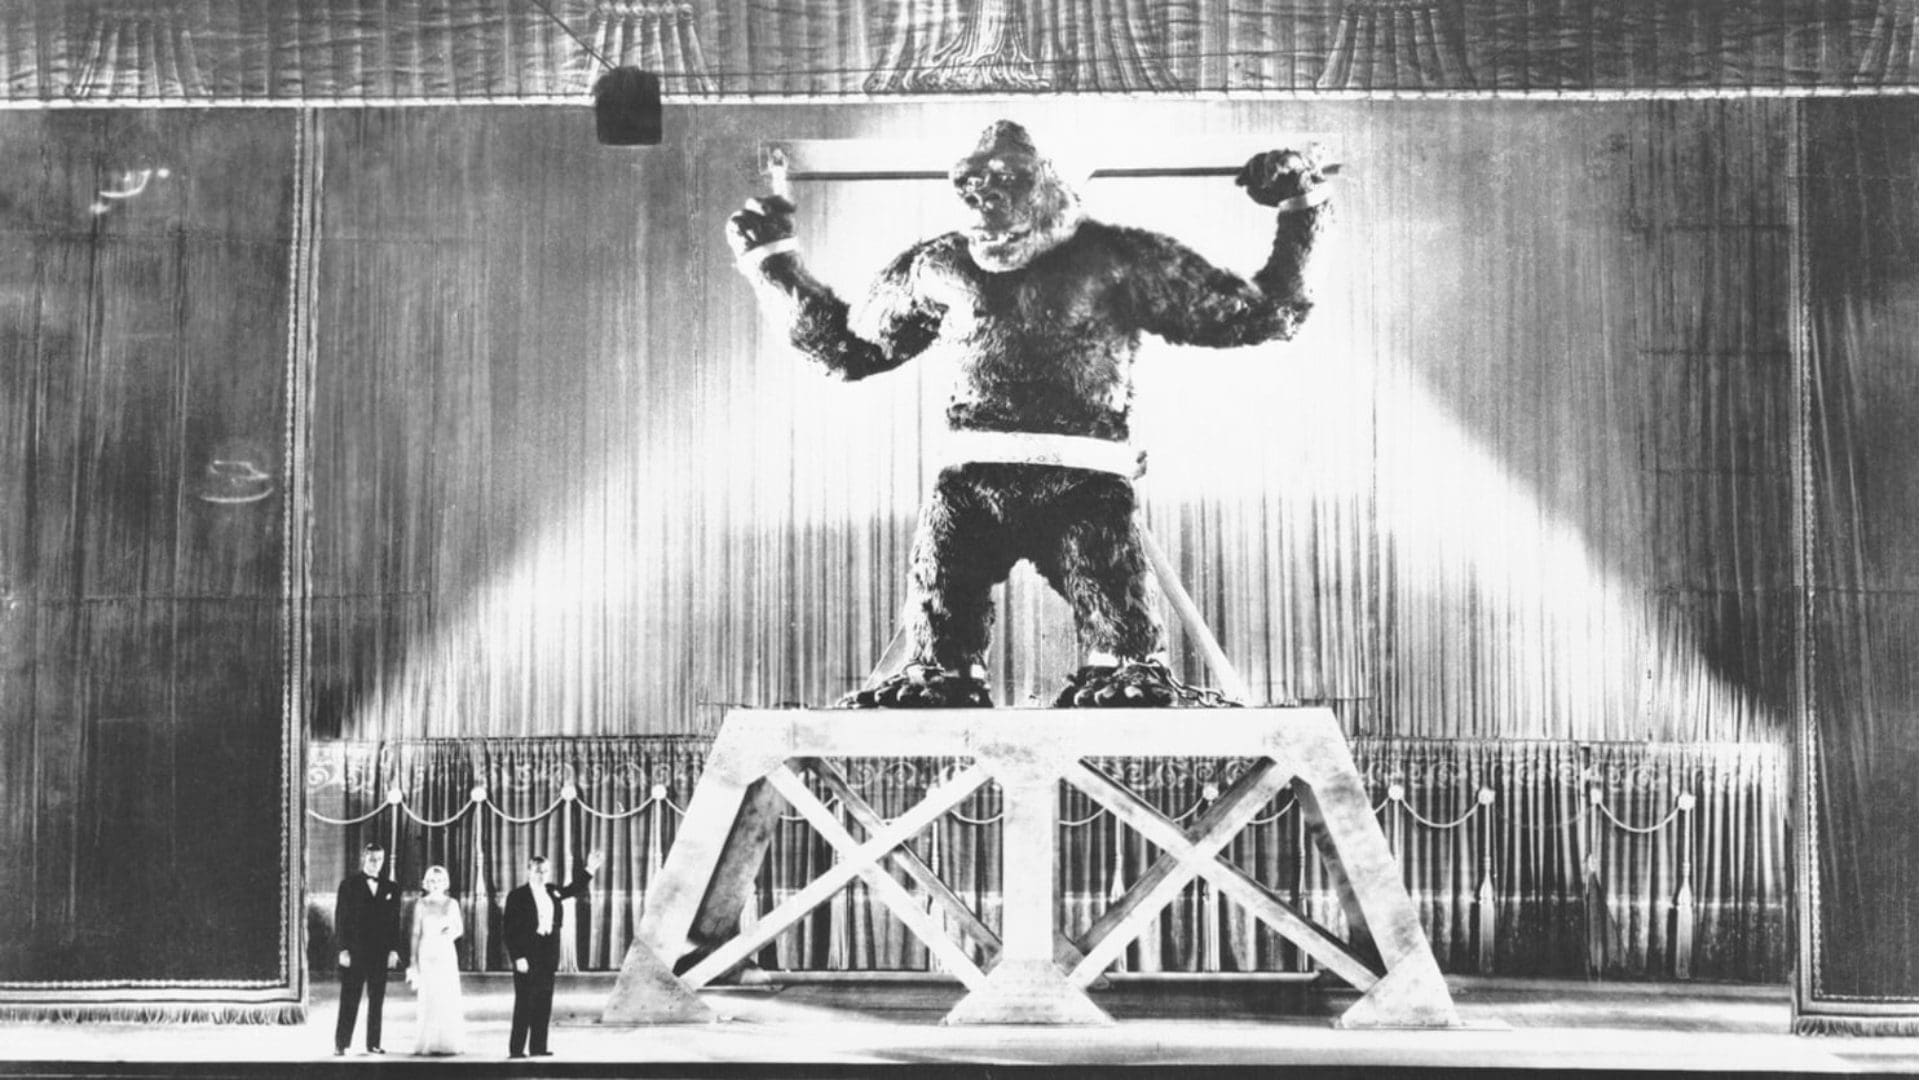 For Your Reference - King Kong - Spectacle of racism